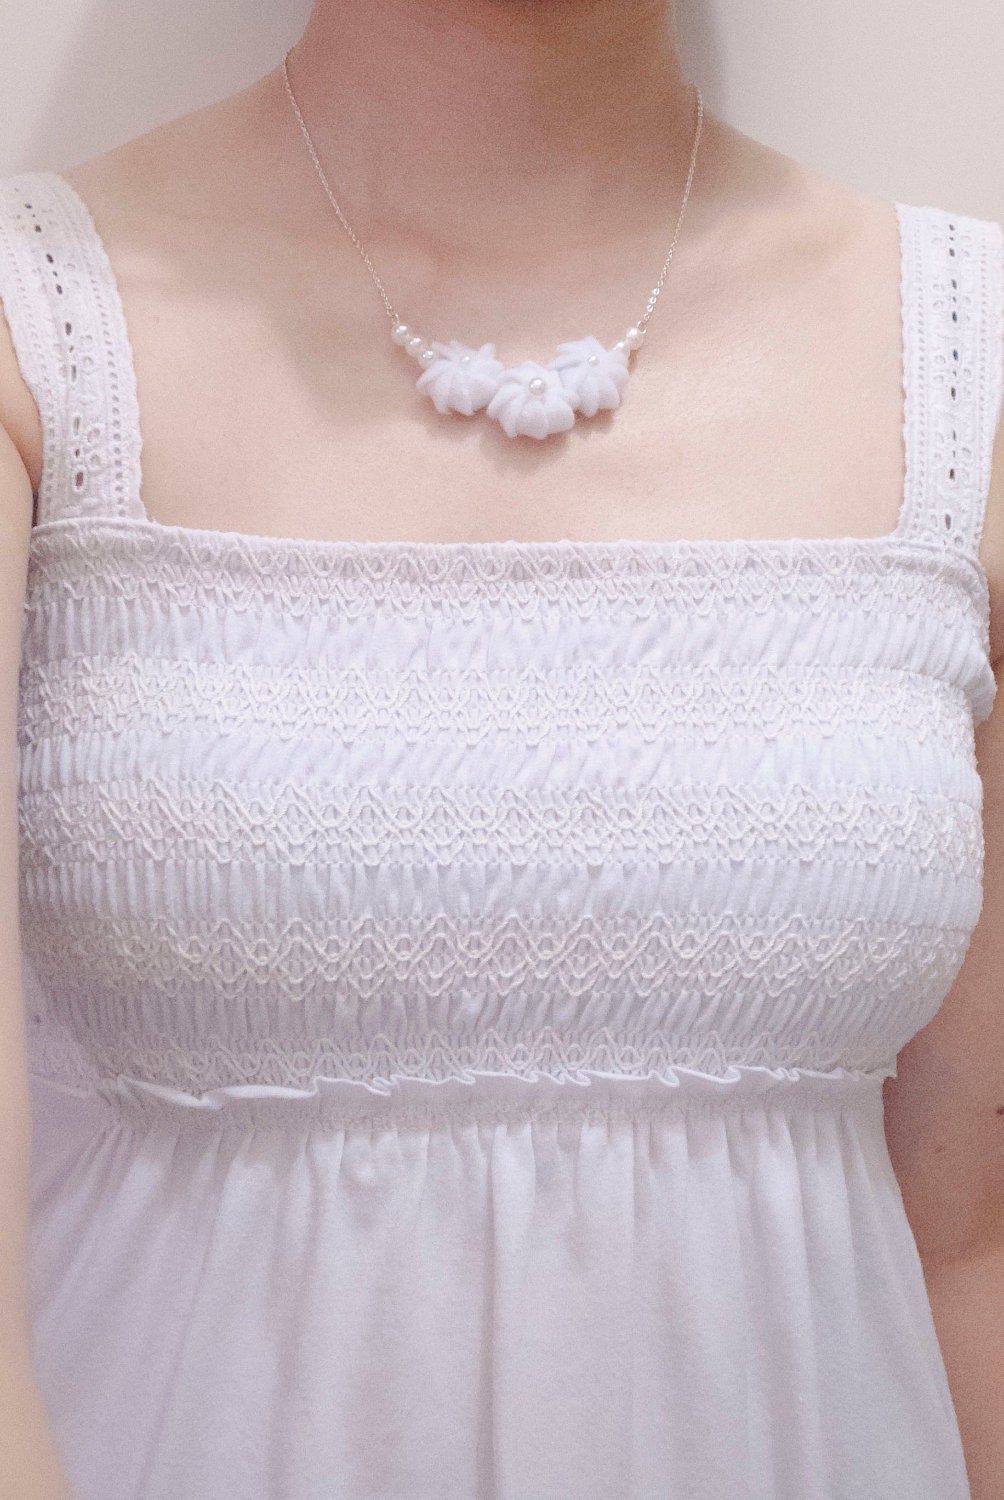 Felt Whipped Cream  with Pearls Necklace/Bracelet - Custom Made Available